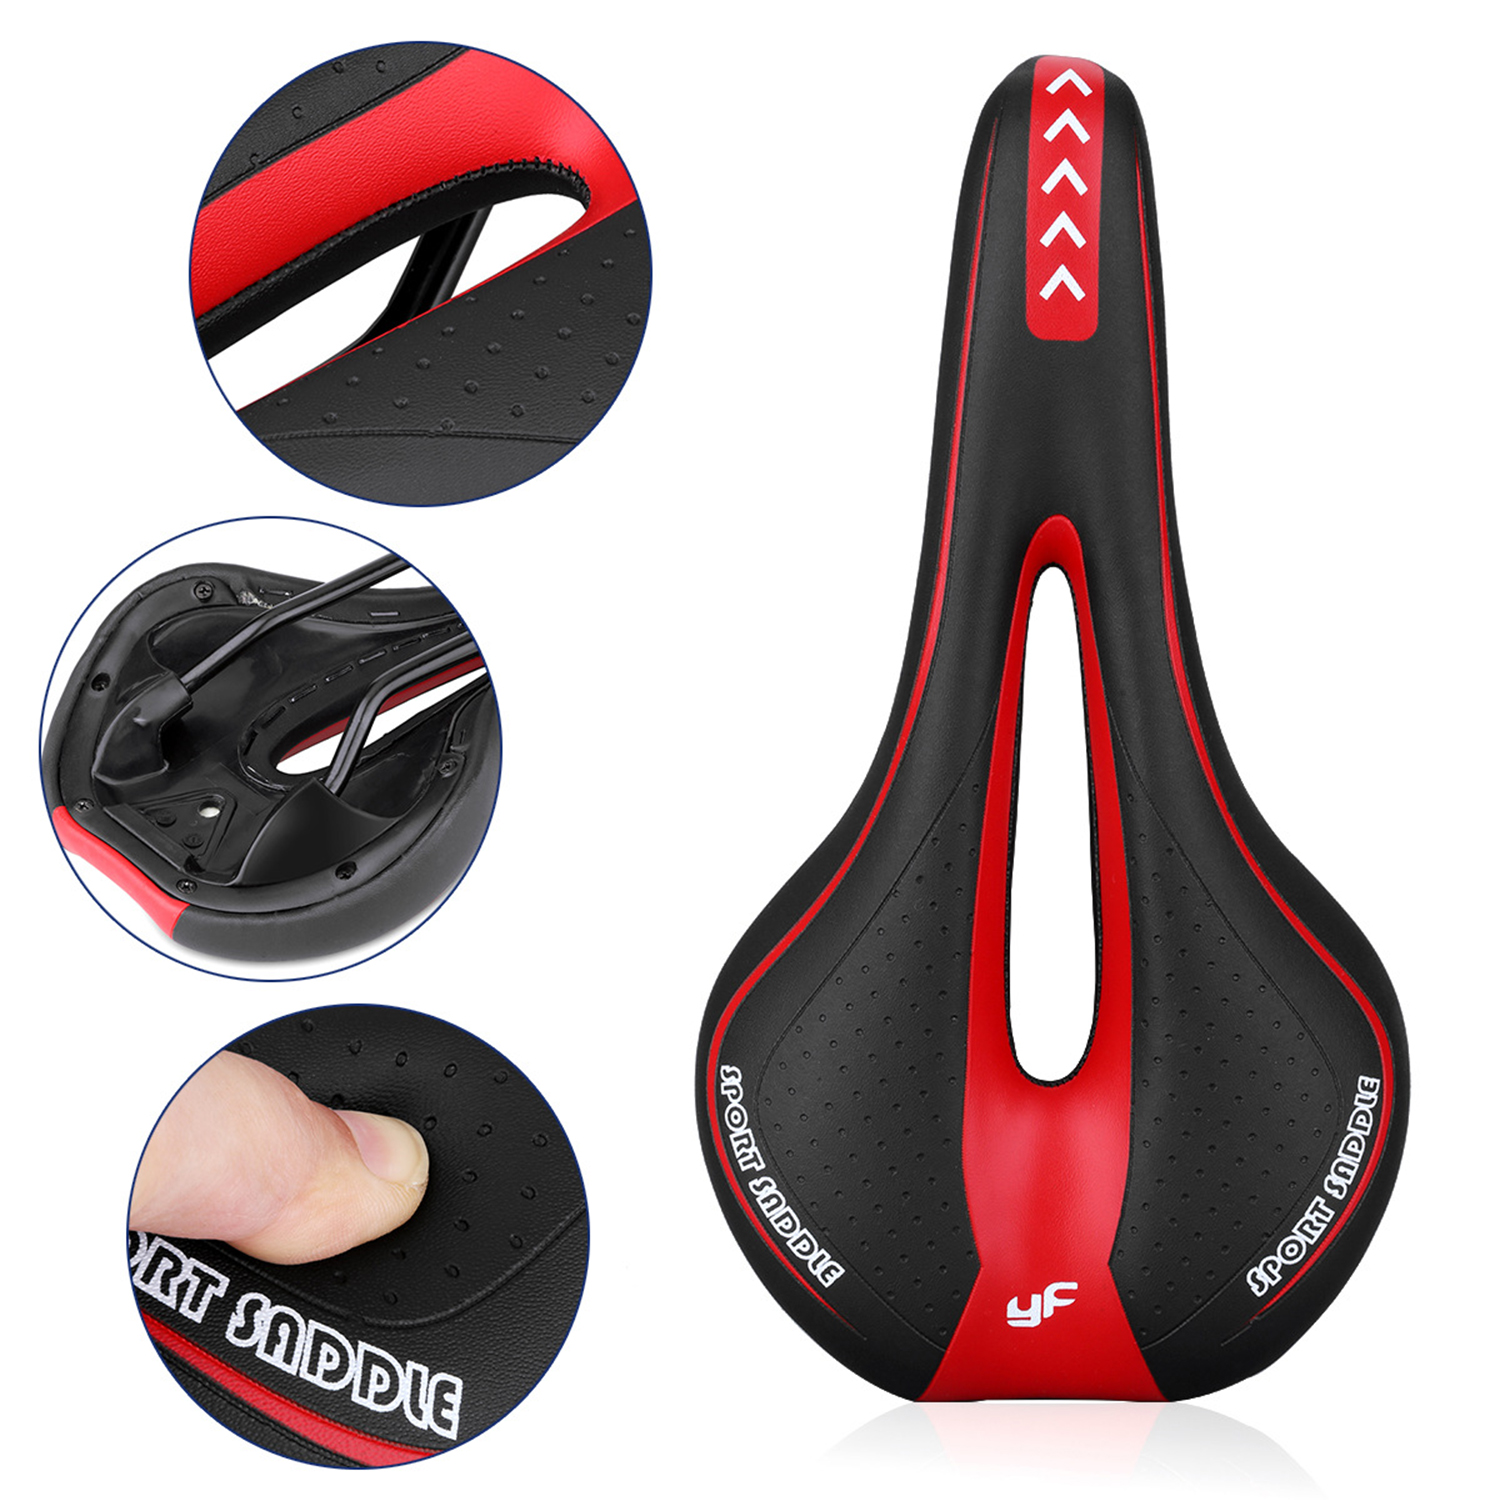 EZGO Bicycle Seat Mountain Bike Cycling Seat  Memory Foam Saddle Comfortable Soft Padded with Wrench, Red - image 3 of 7